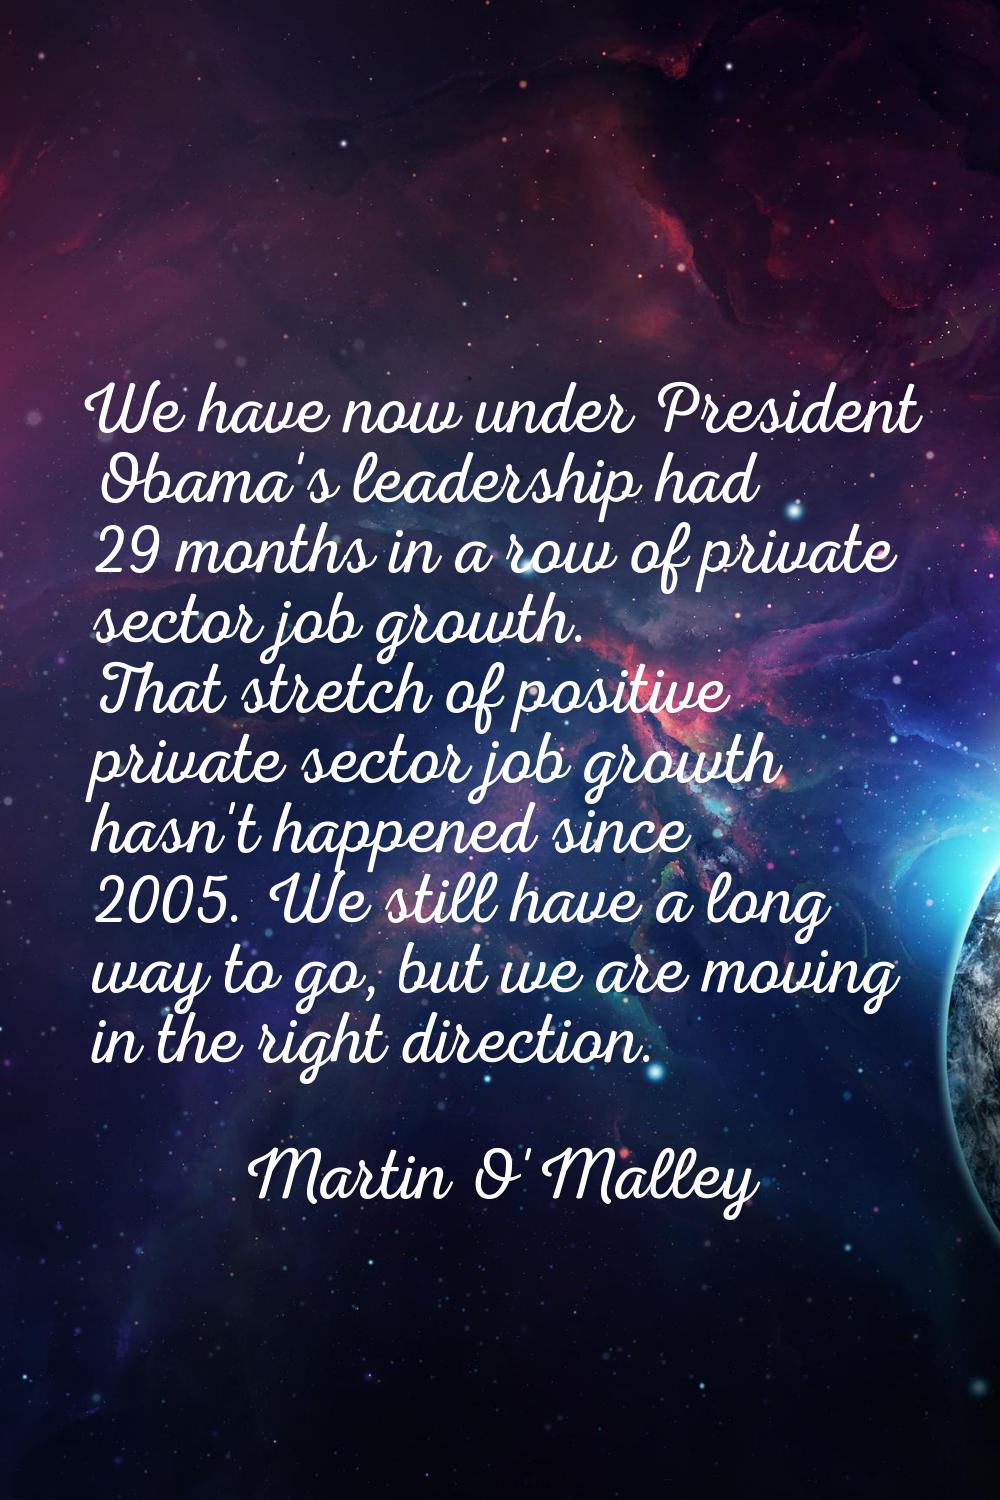 We have now under President Obama's leadership had 29 months in a row of private sector job growth.